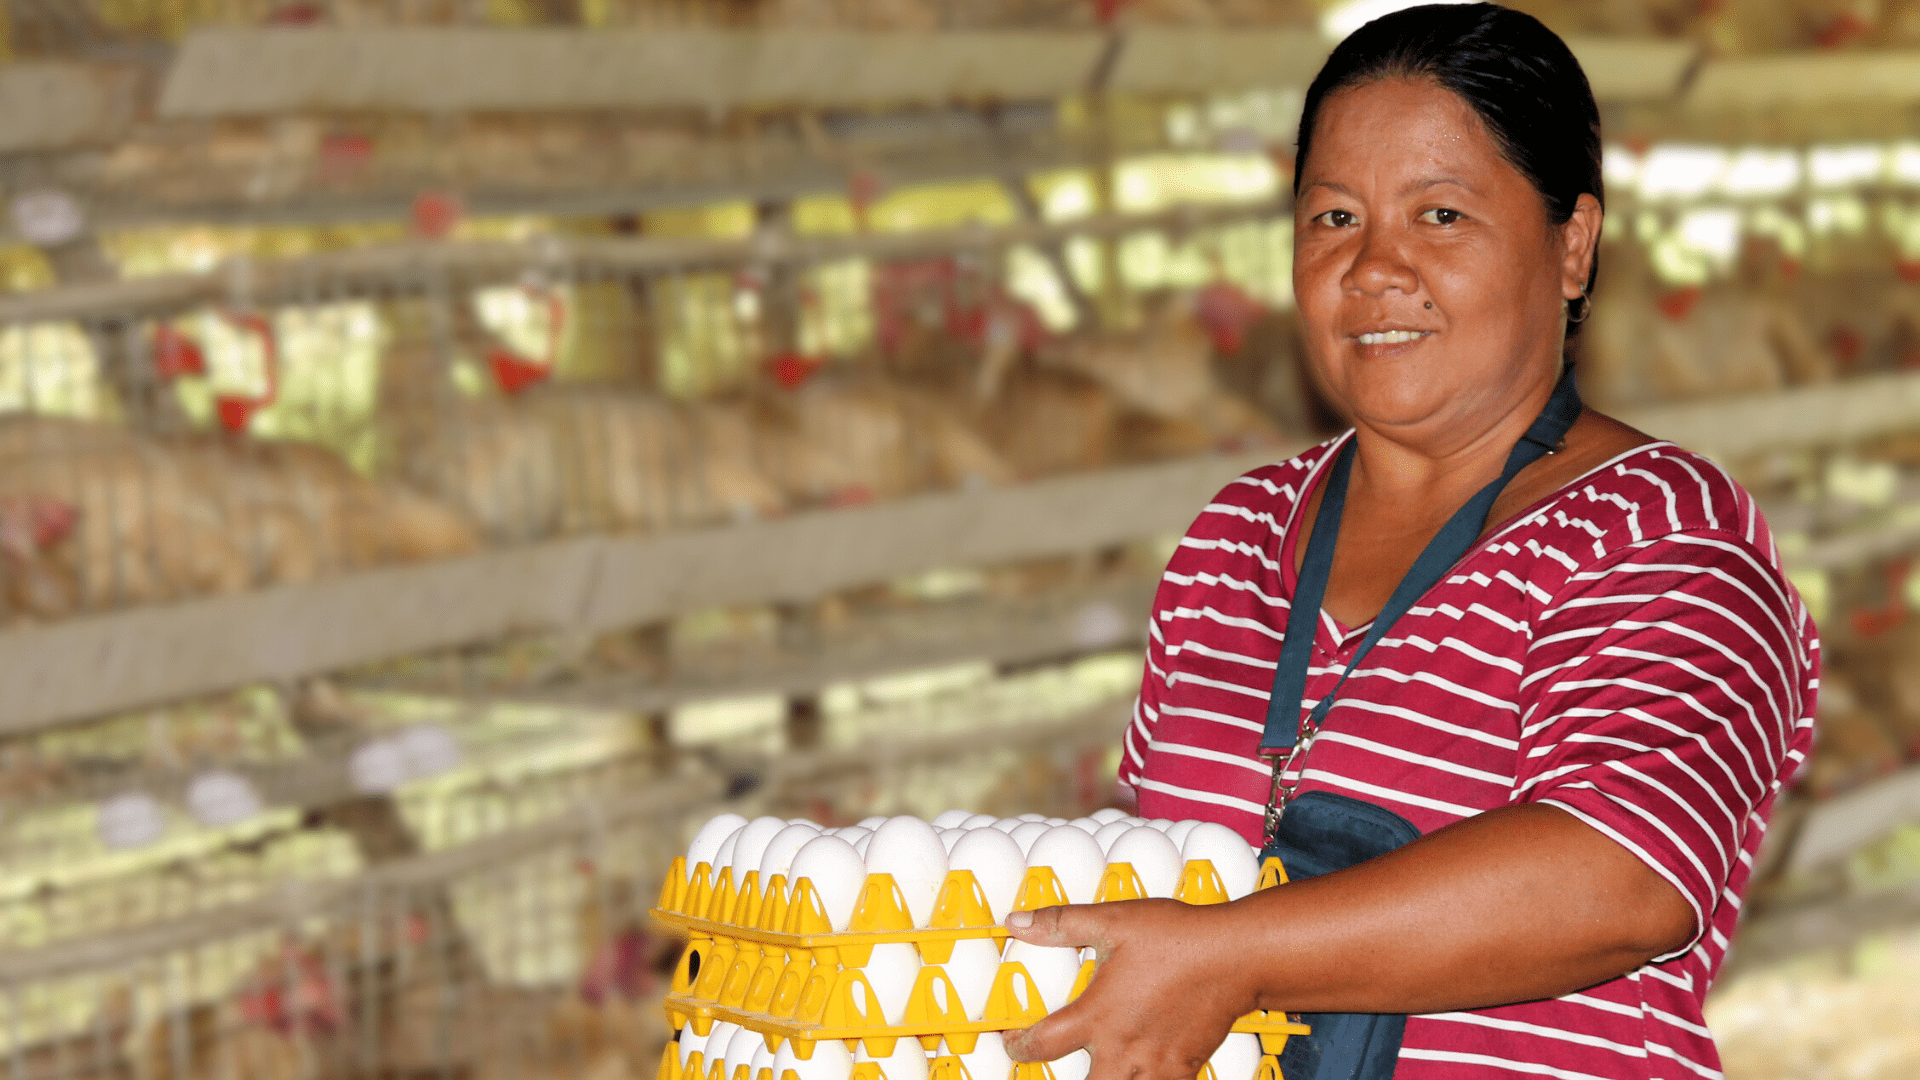 Women-led association in OcciMin turns SAAD project into a thriving poultry business